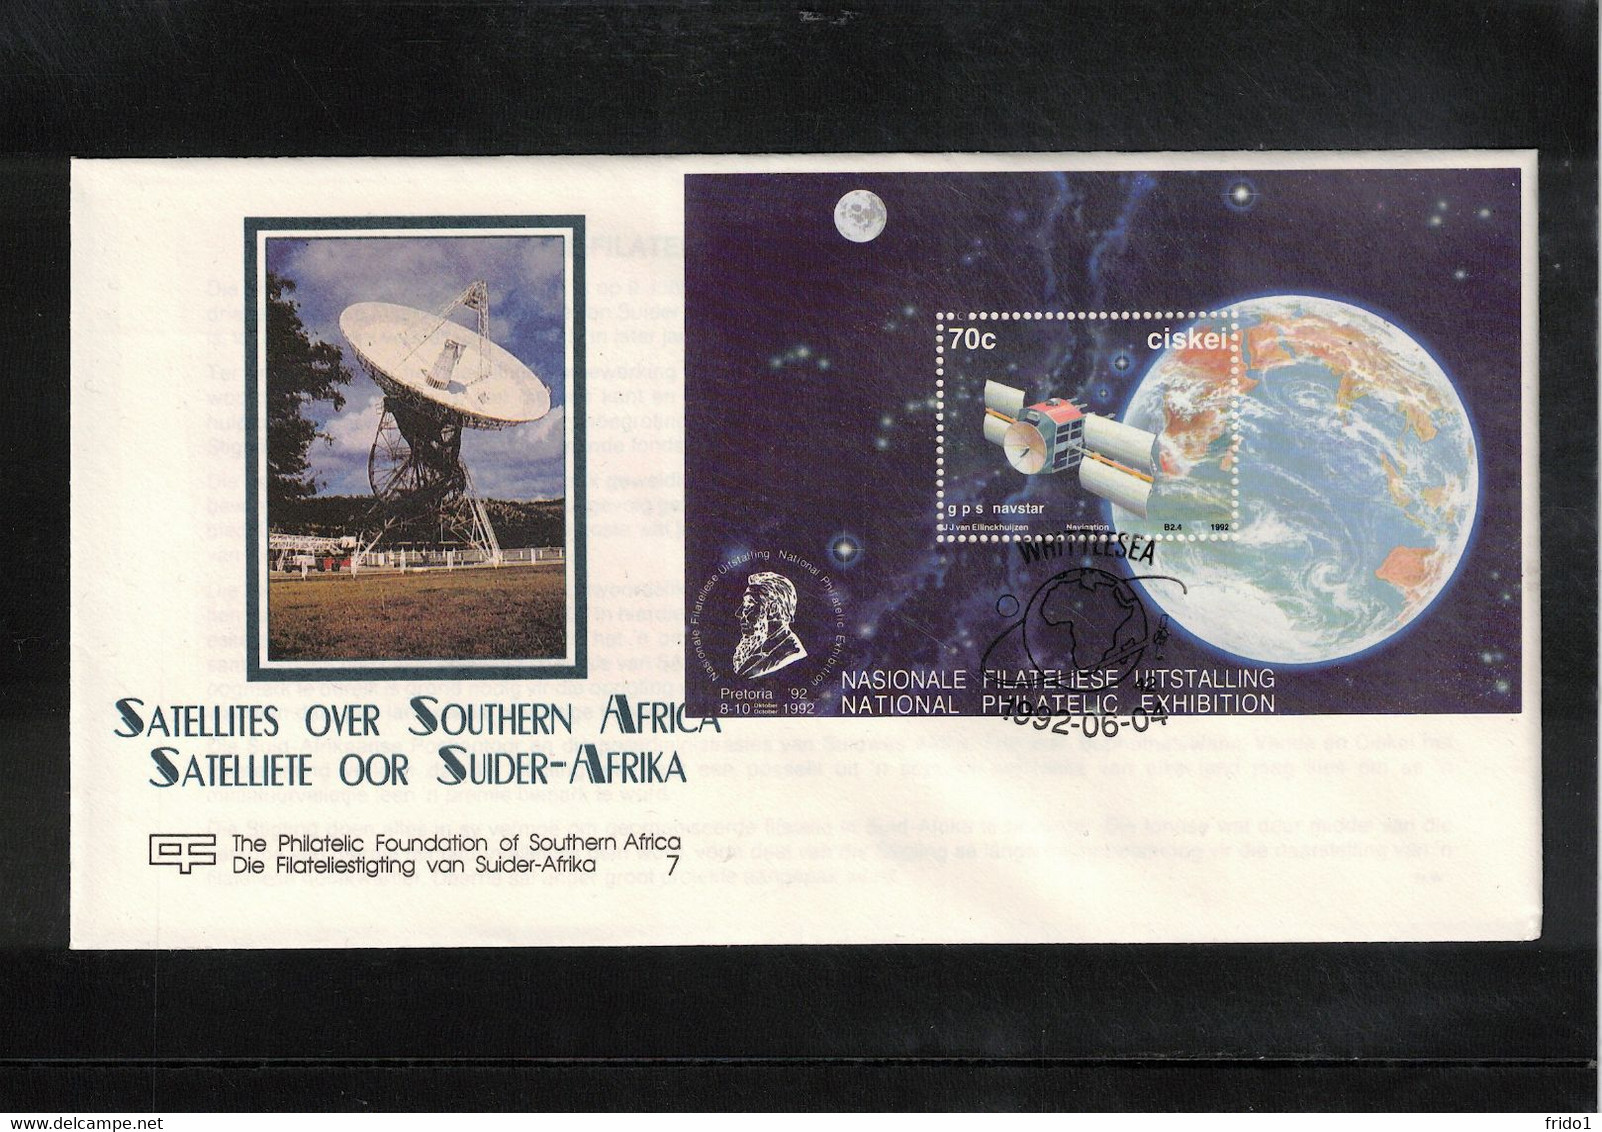 Ciskei 1992 Space / Raumfahrt Satellites Over Southern Africa Block FDC - Africa